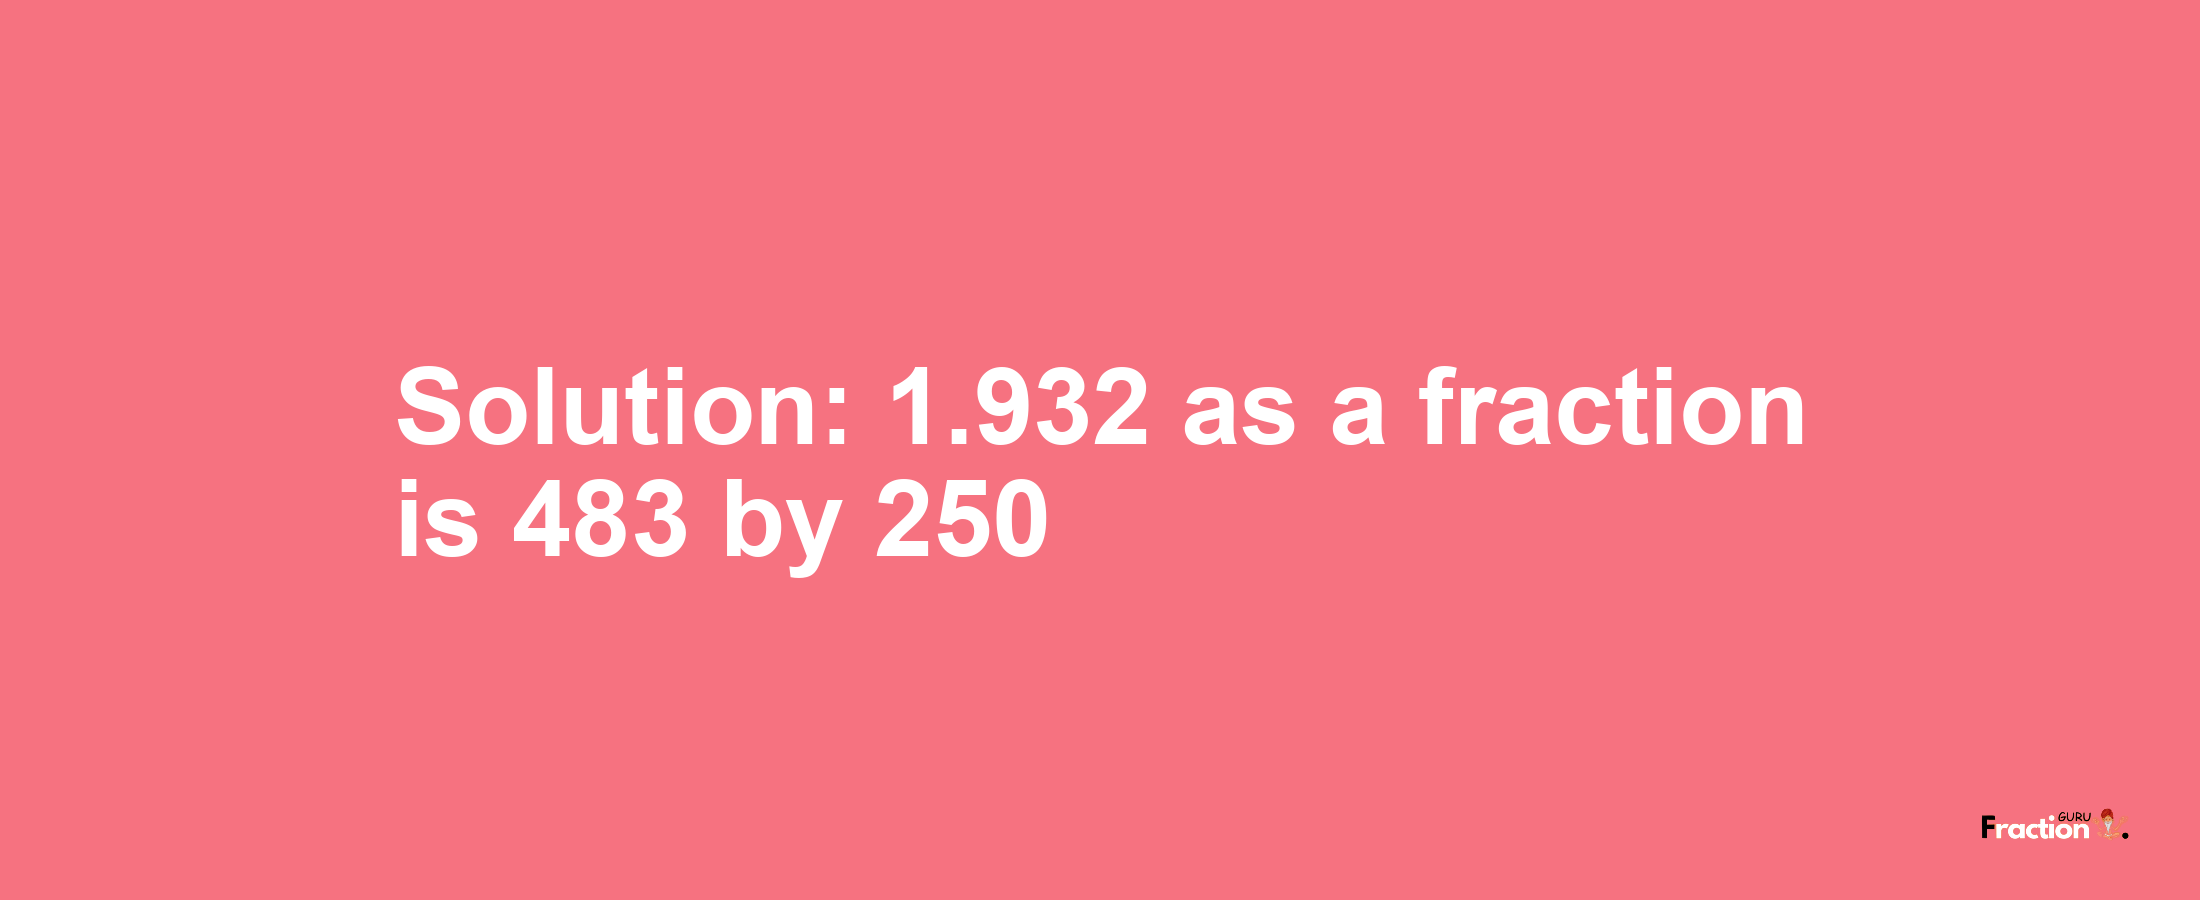 Solution:1.932 as a fraction is 483/250